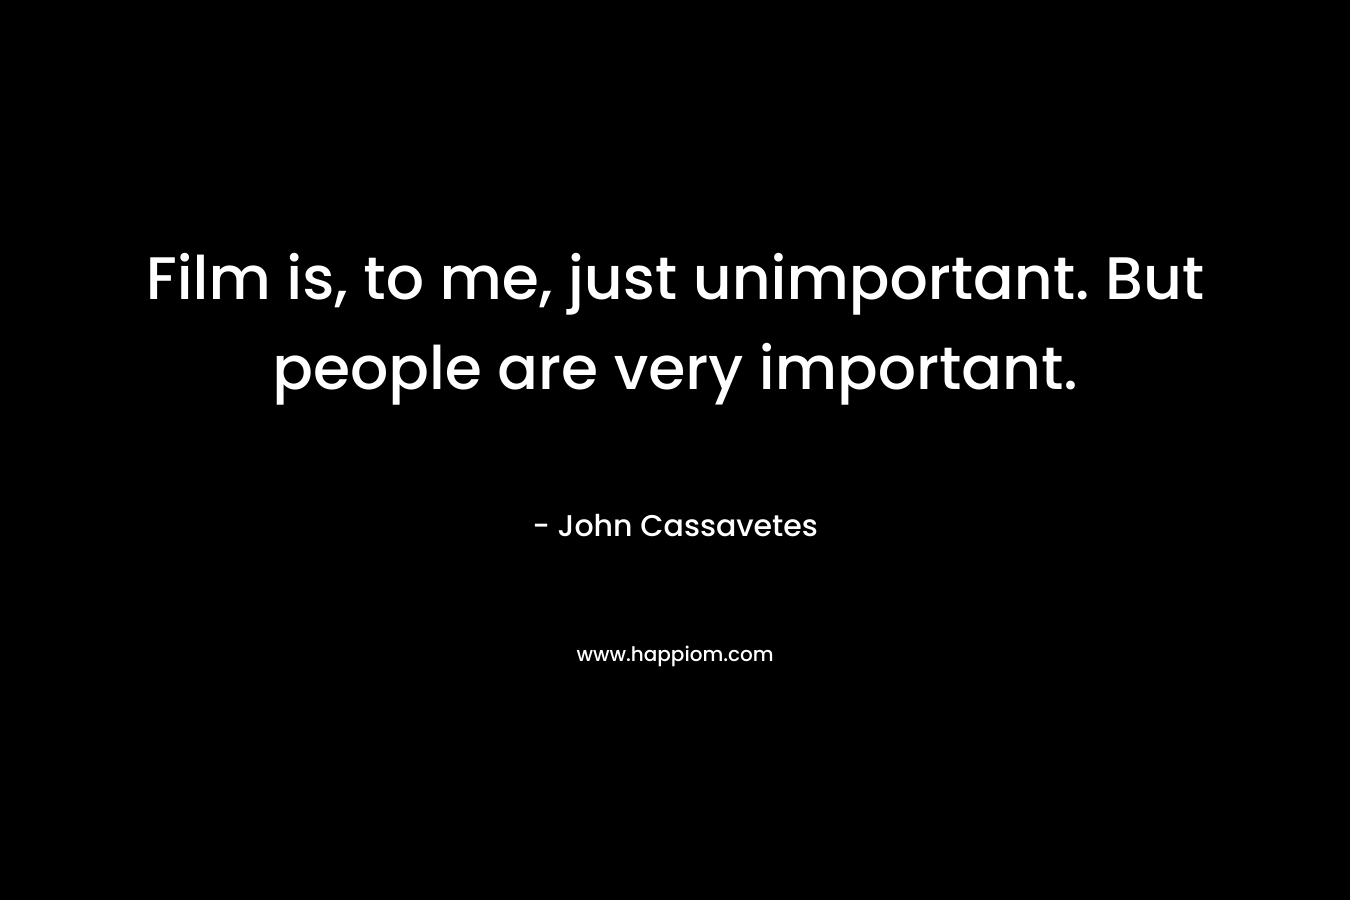 Film is, to me, just unimportant. But people are very important. – John Cassavetes